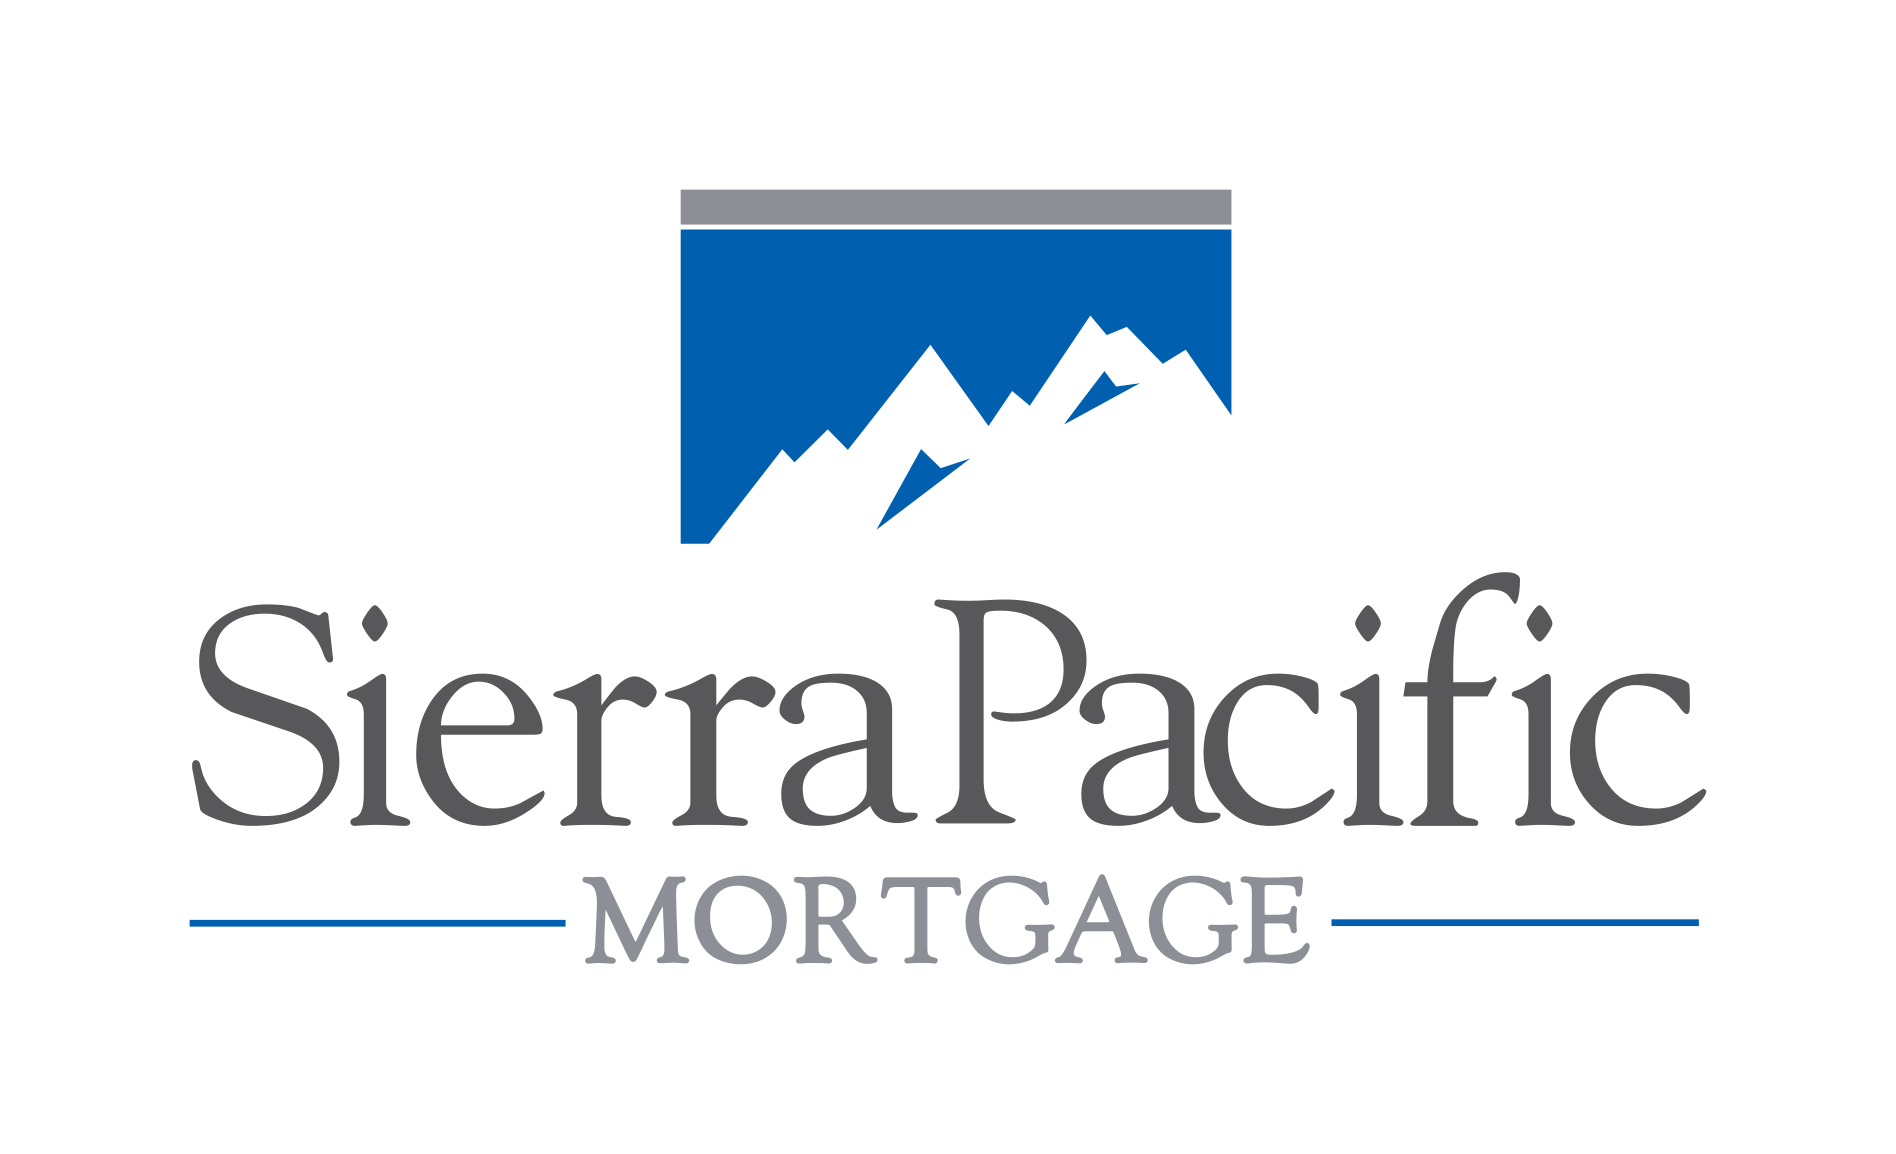 Sierra Pacific Mortgage Partners with Access Business Technologies to